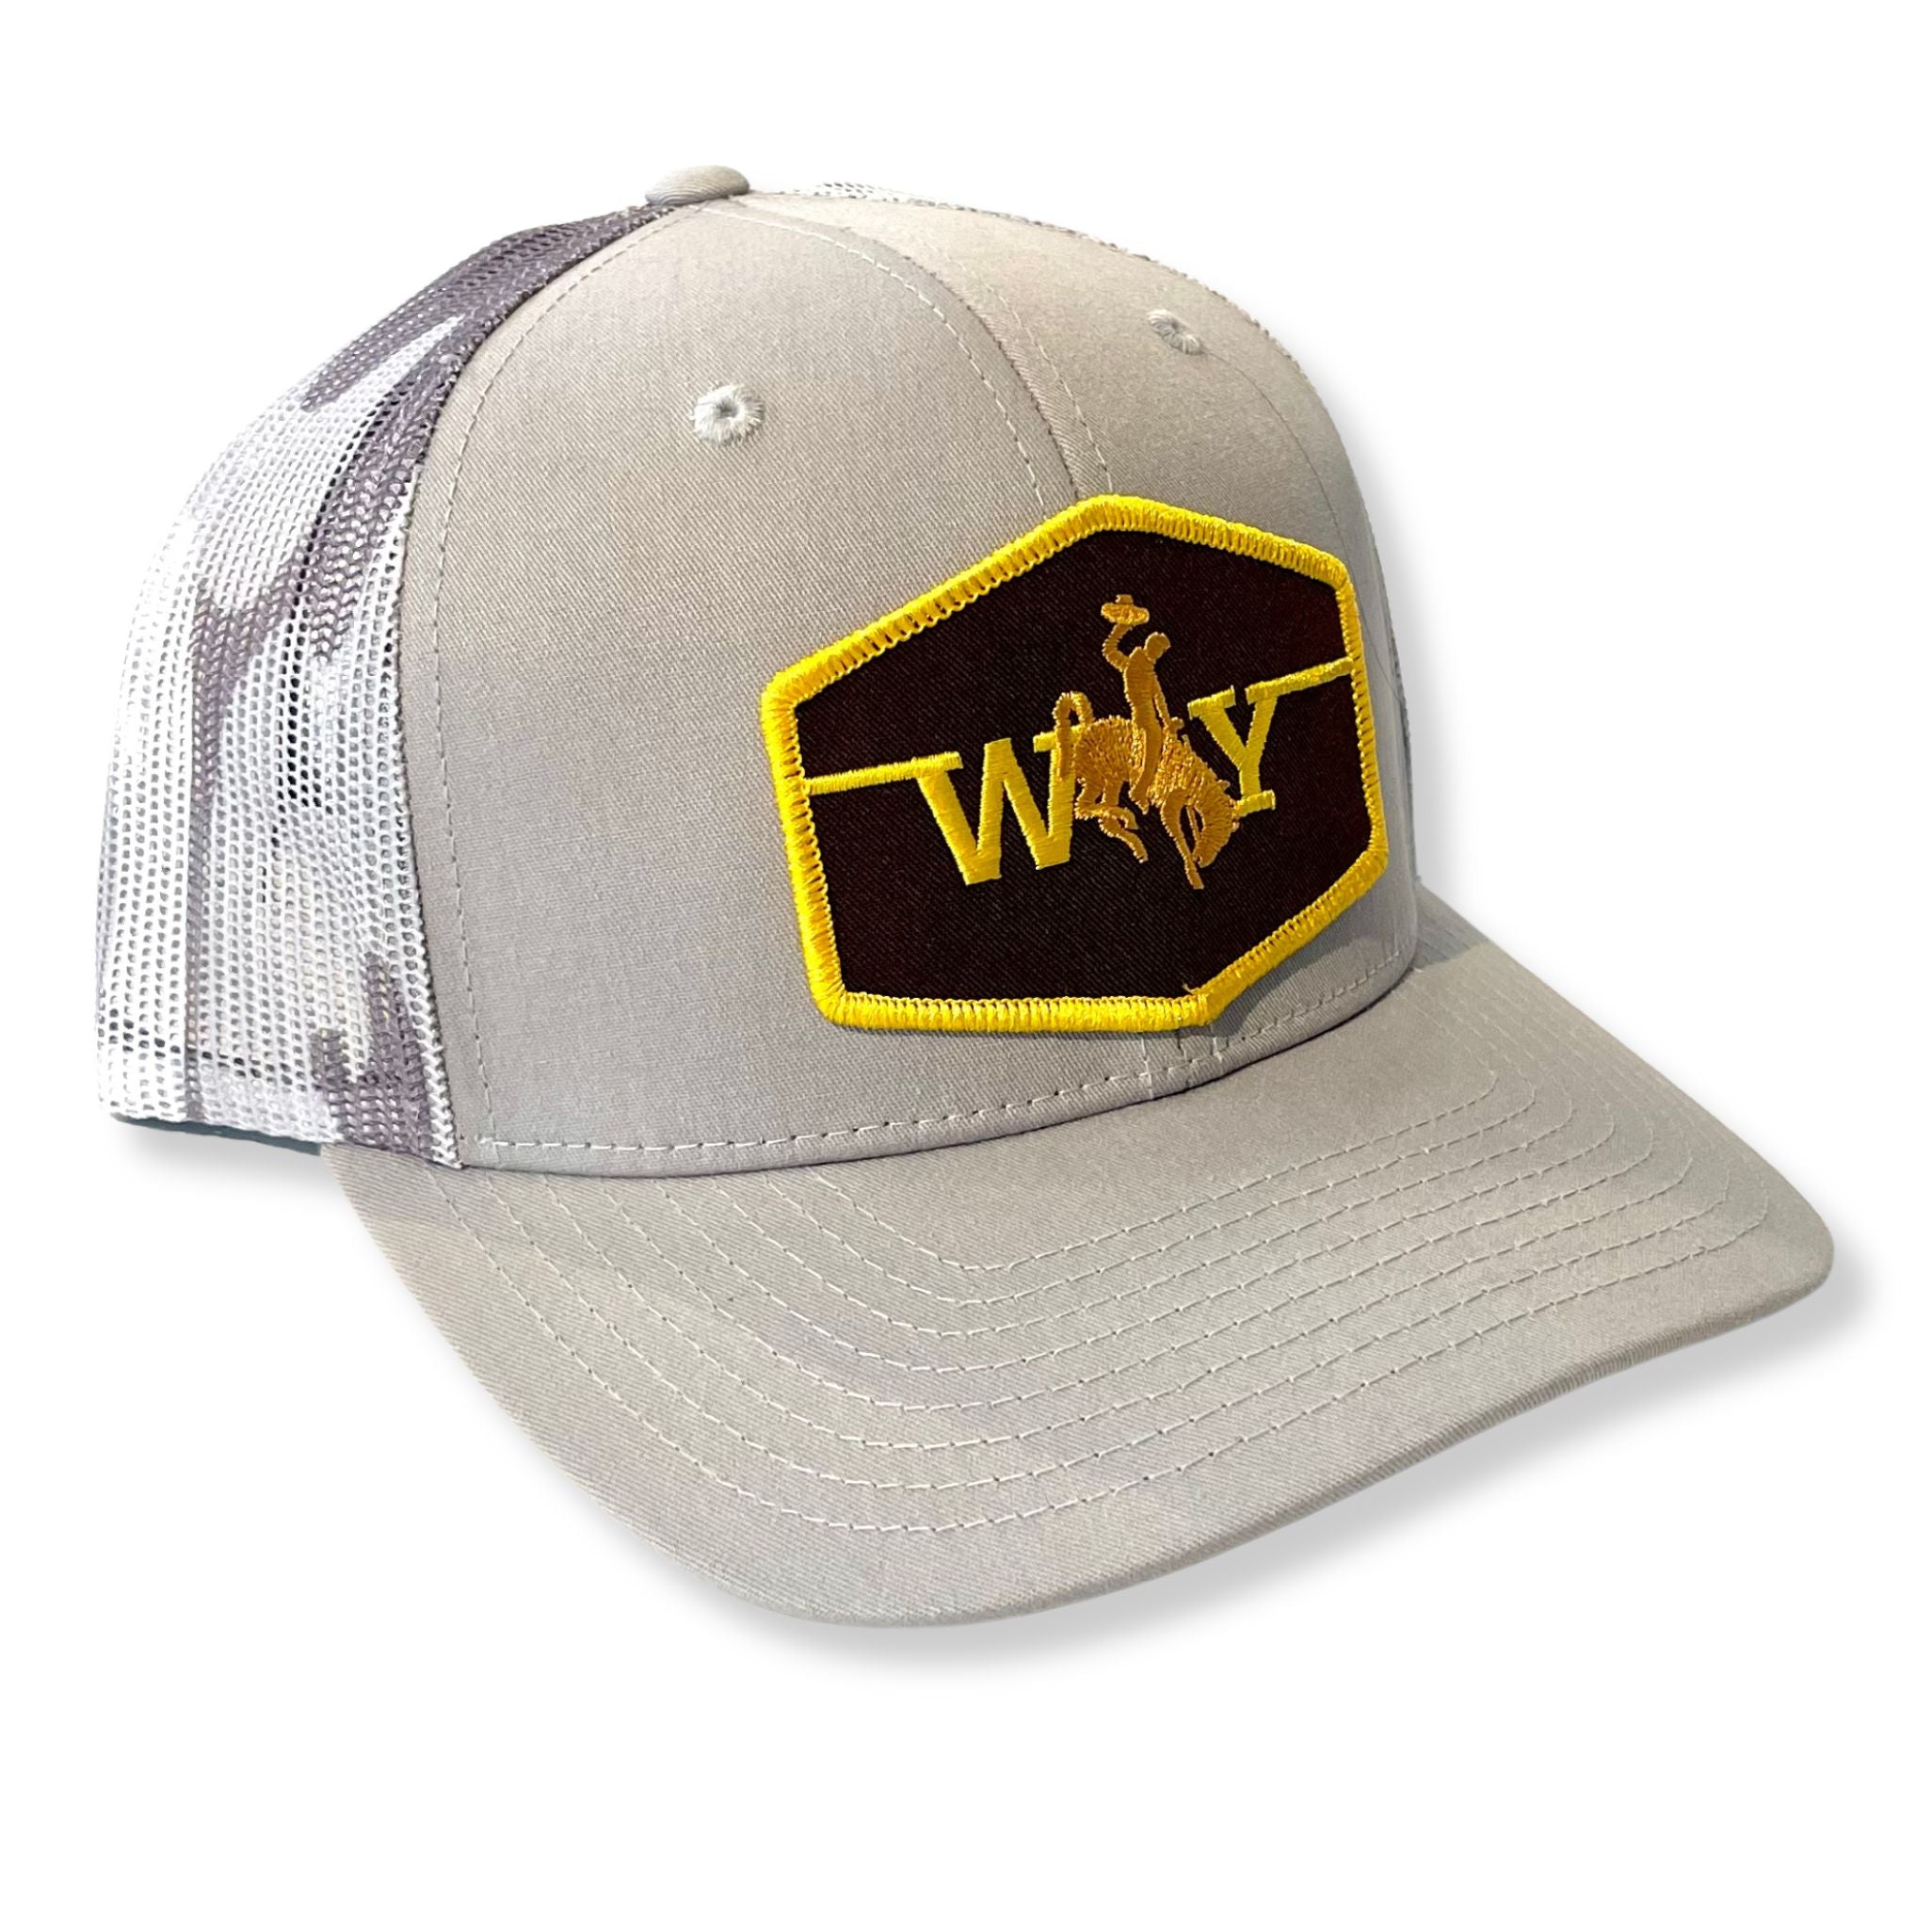 Light Grey with  White- Grey Camo Mesh Back Wyoming Bronco Hat